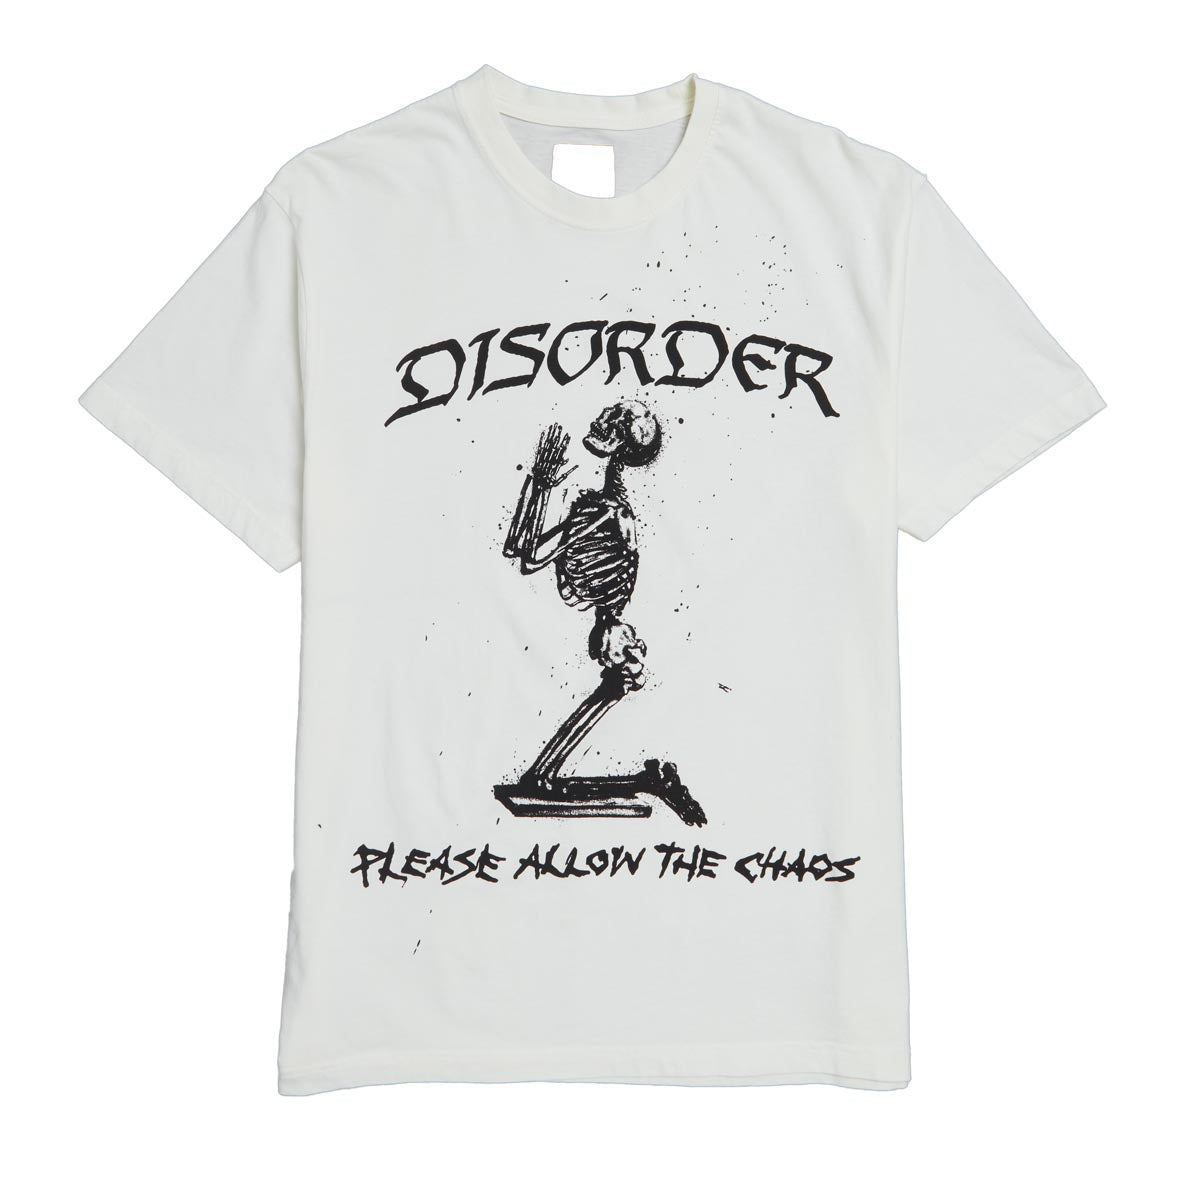 Disorder Allow The Chaos T-Shirt - Vintage White image 1